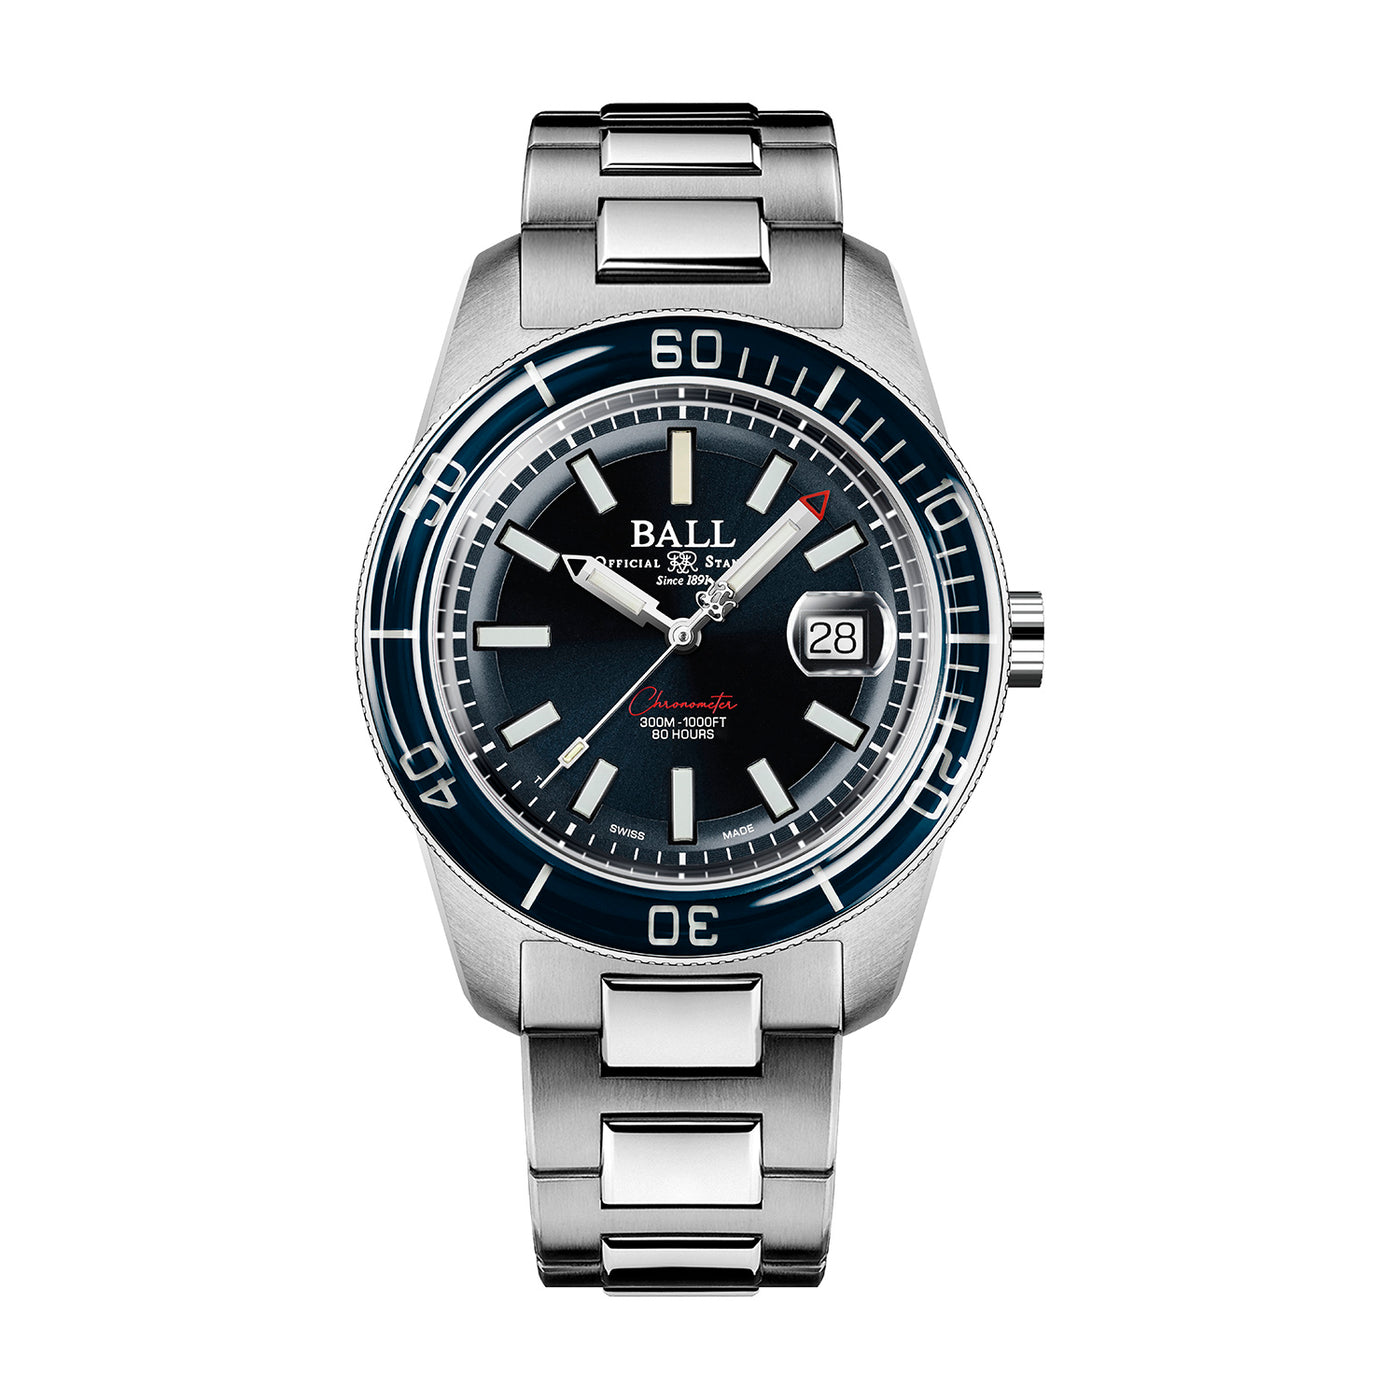 Ball Watch Engineer M Skin Diver III Beyond Limited Edition Automatic – DD3100A-S2C-BE